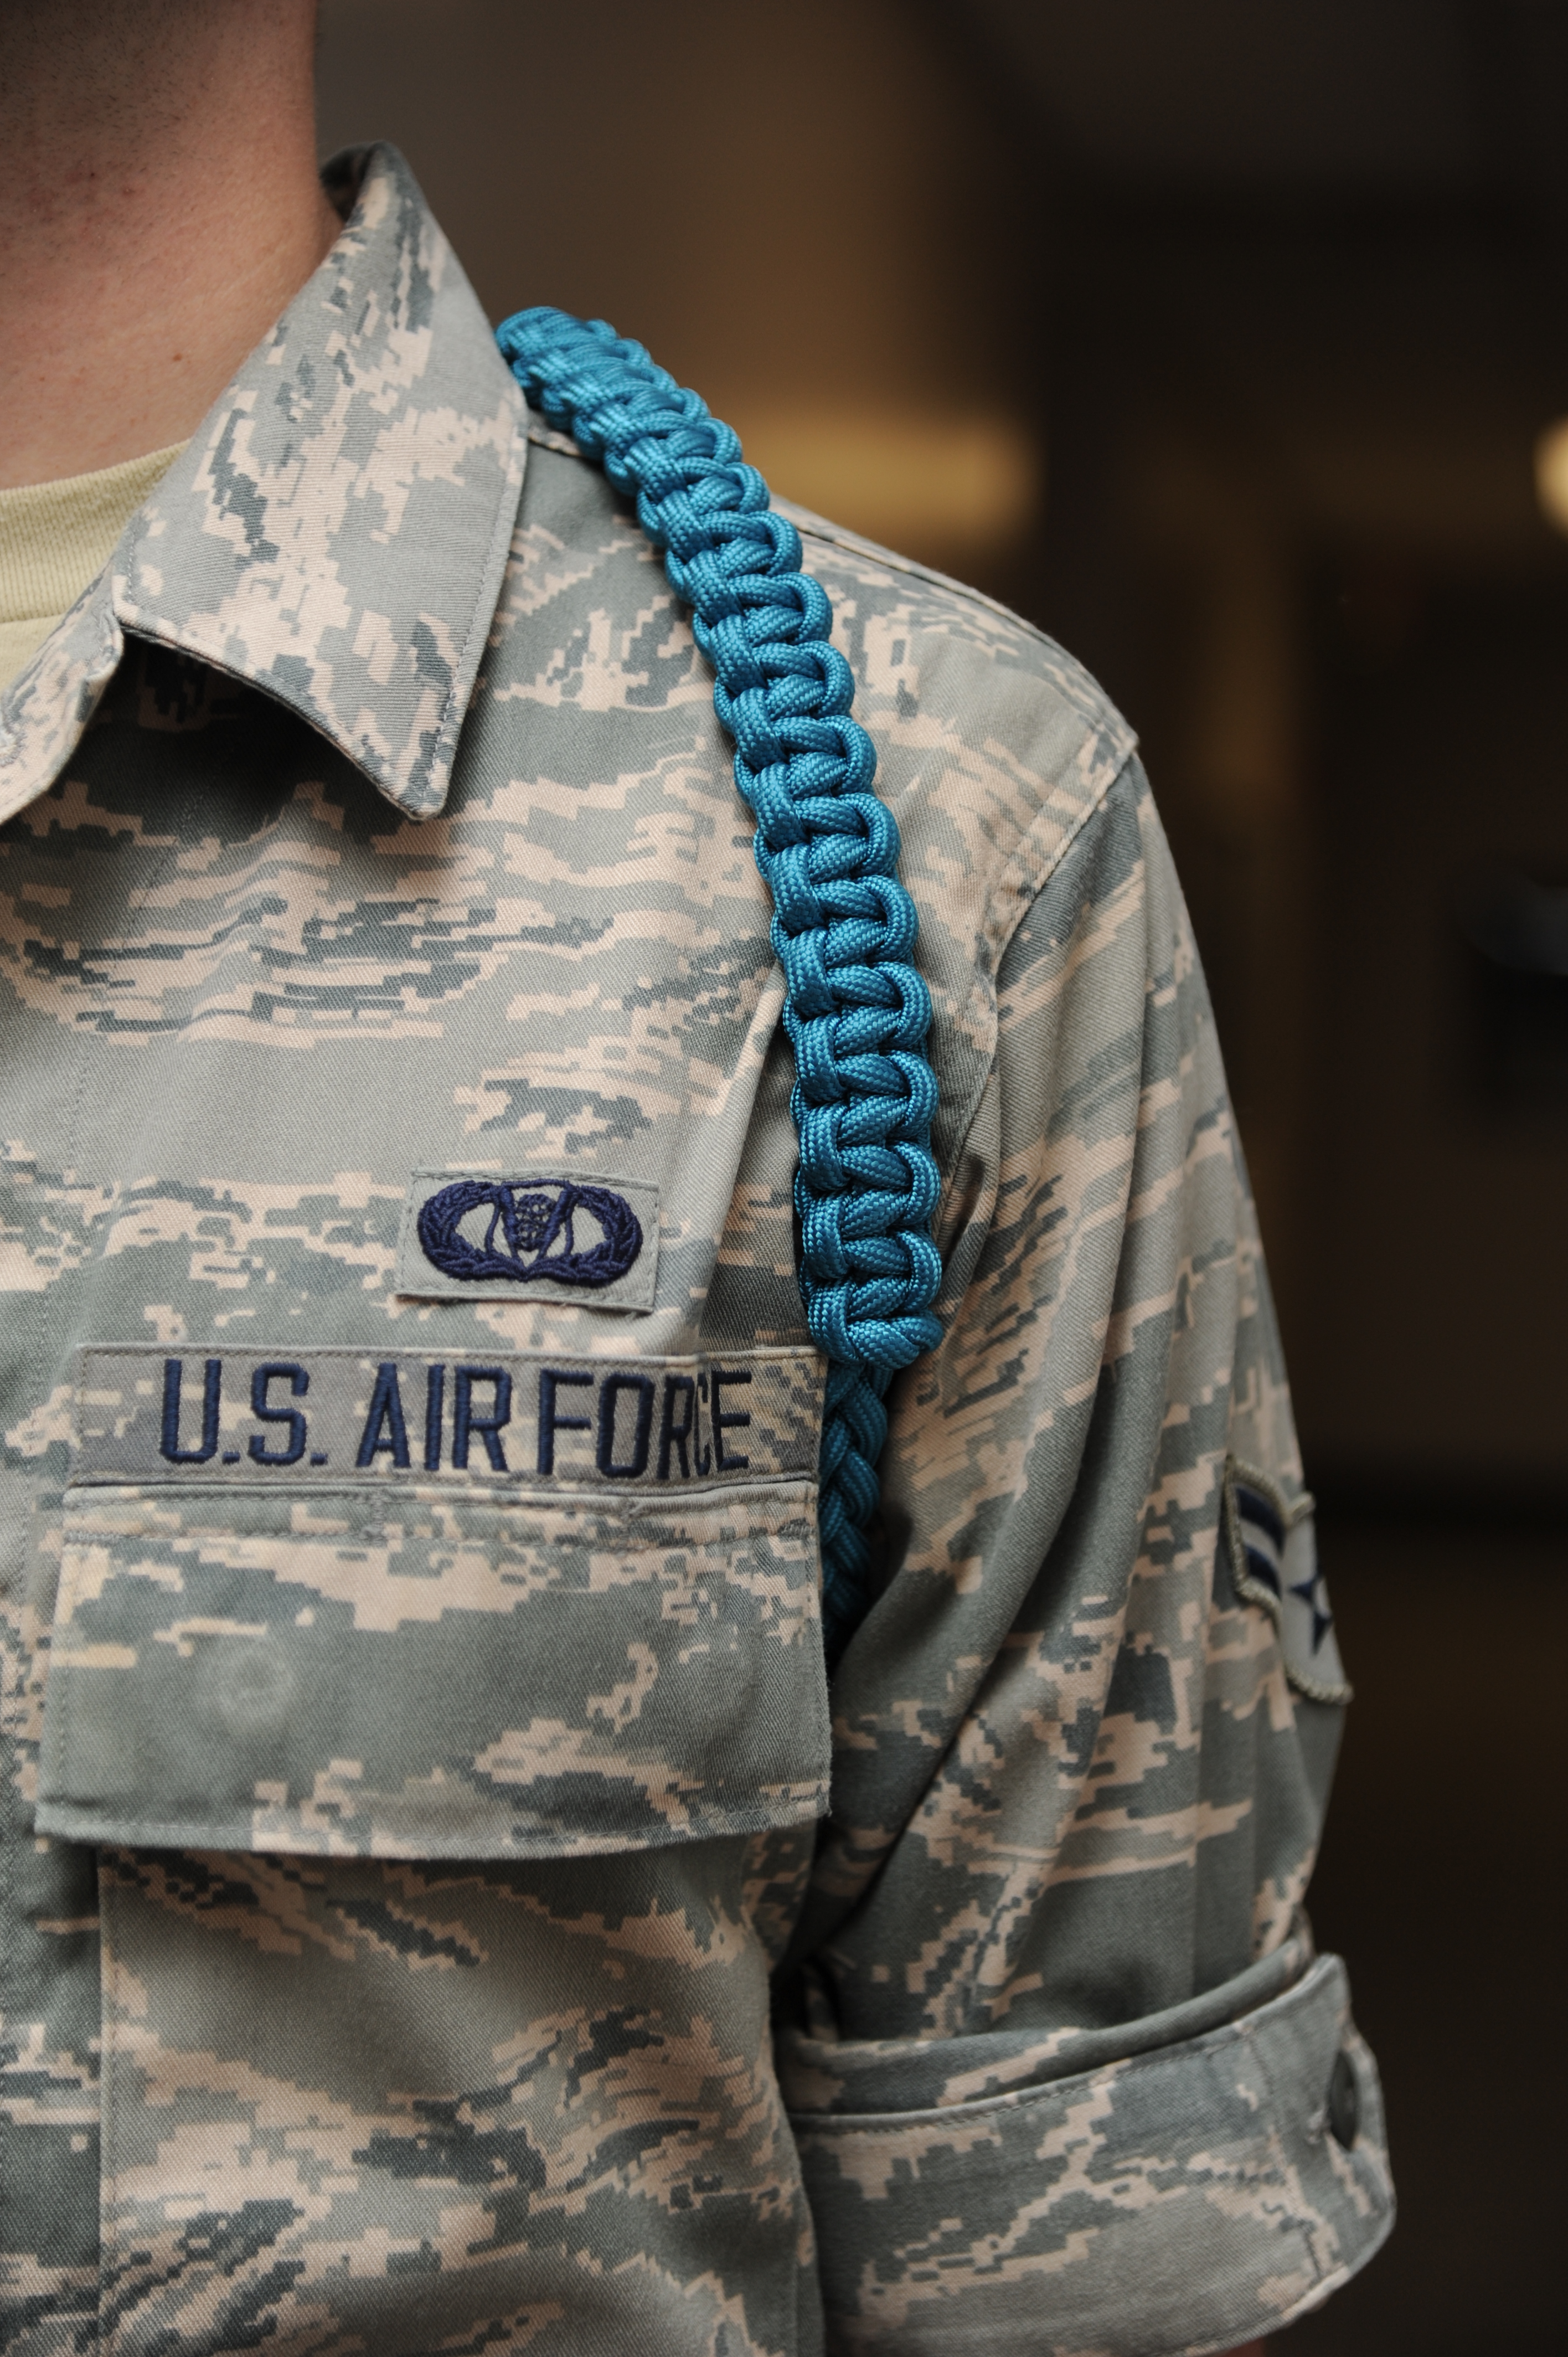 Teal ropes to spotlight sexual assault response > U.S. Air Force > Display